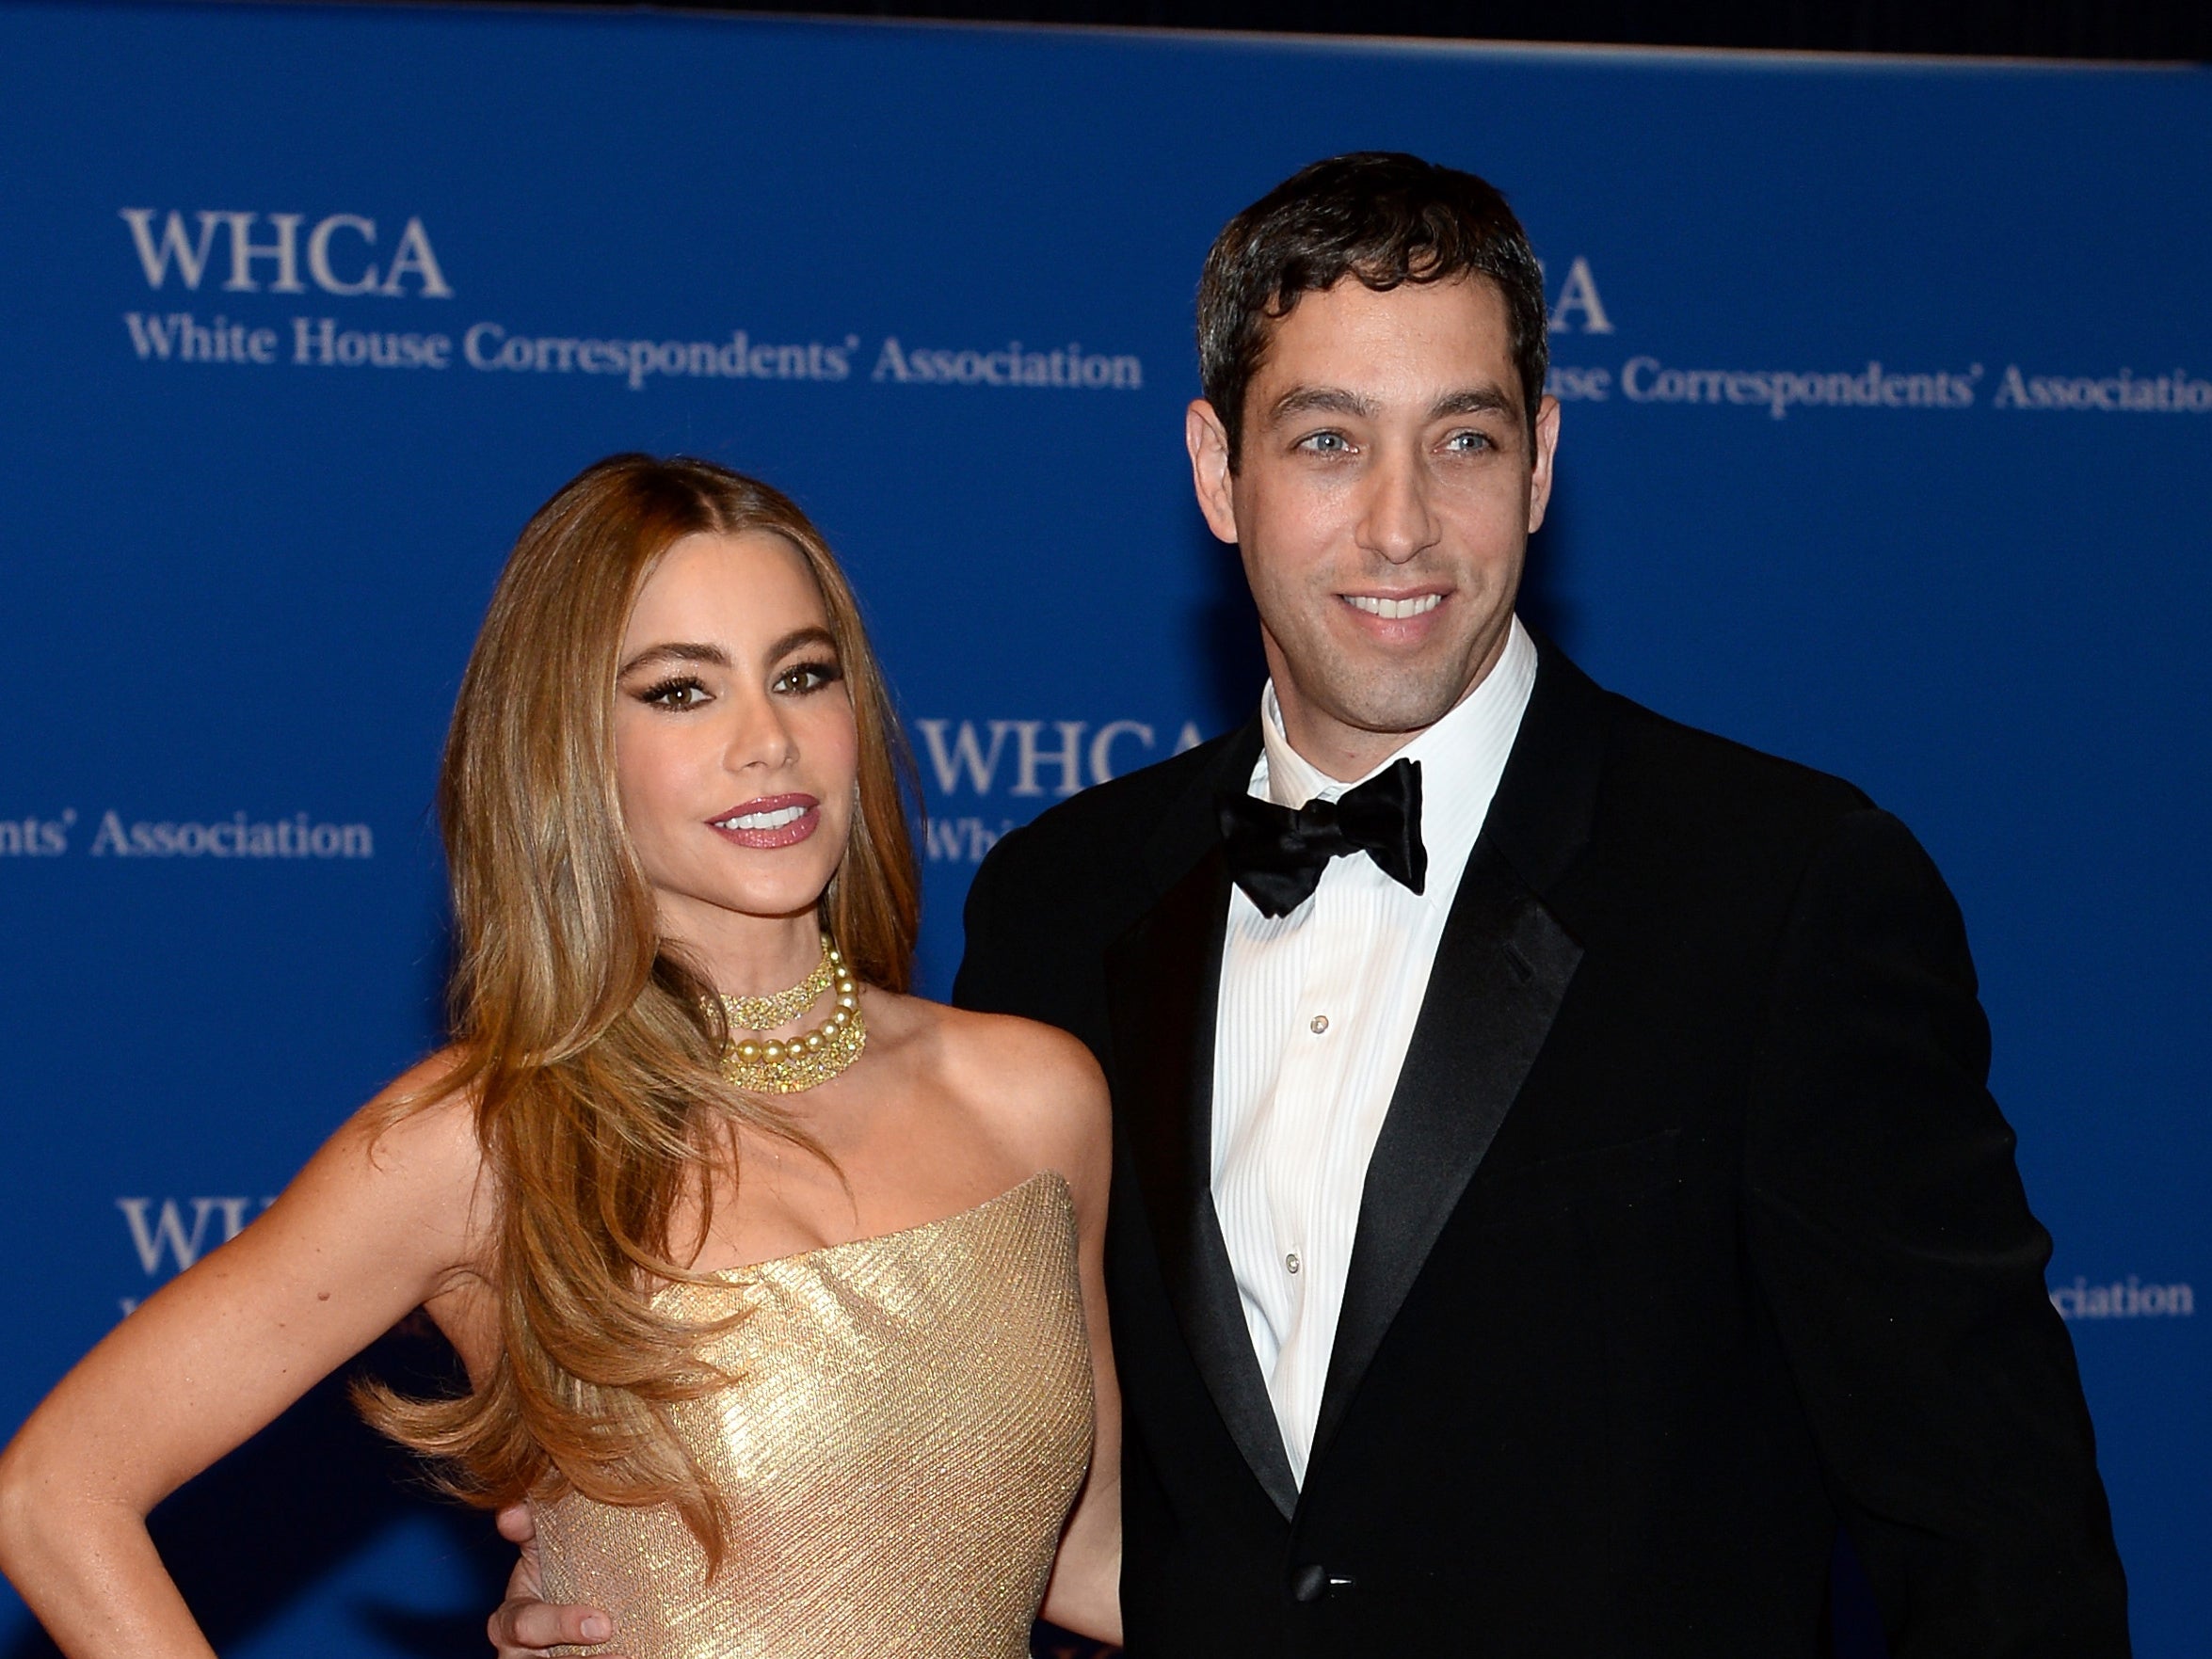 One-time couple Sofia Vergara and Nick Loeb photographed together in 2014